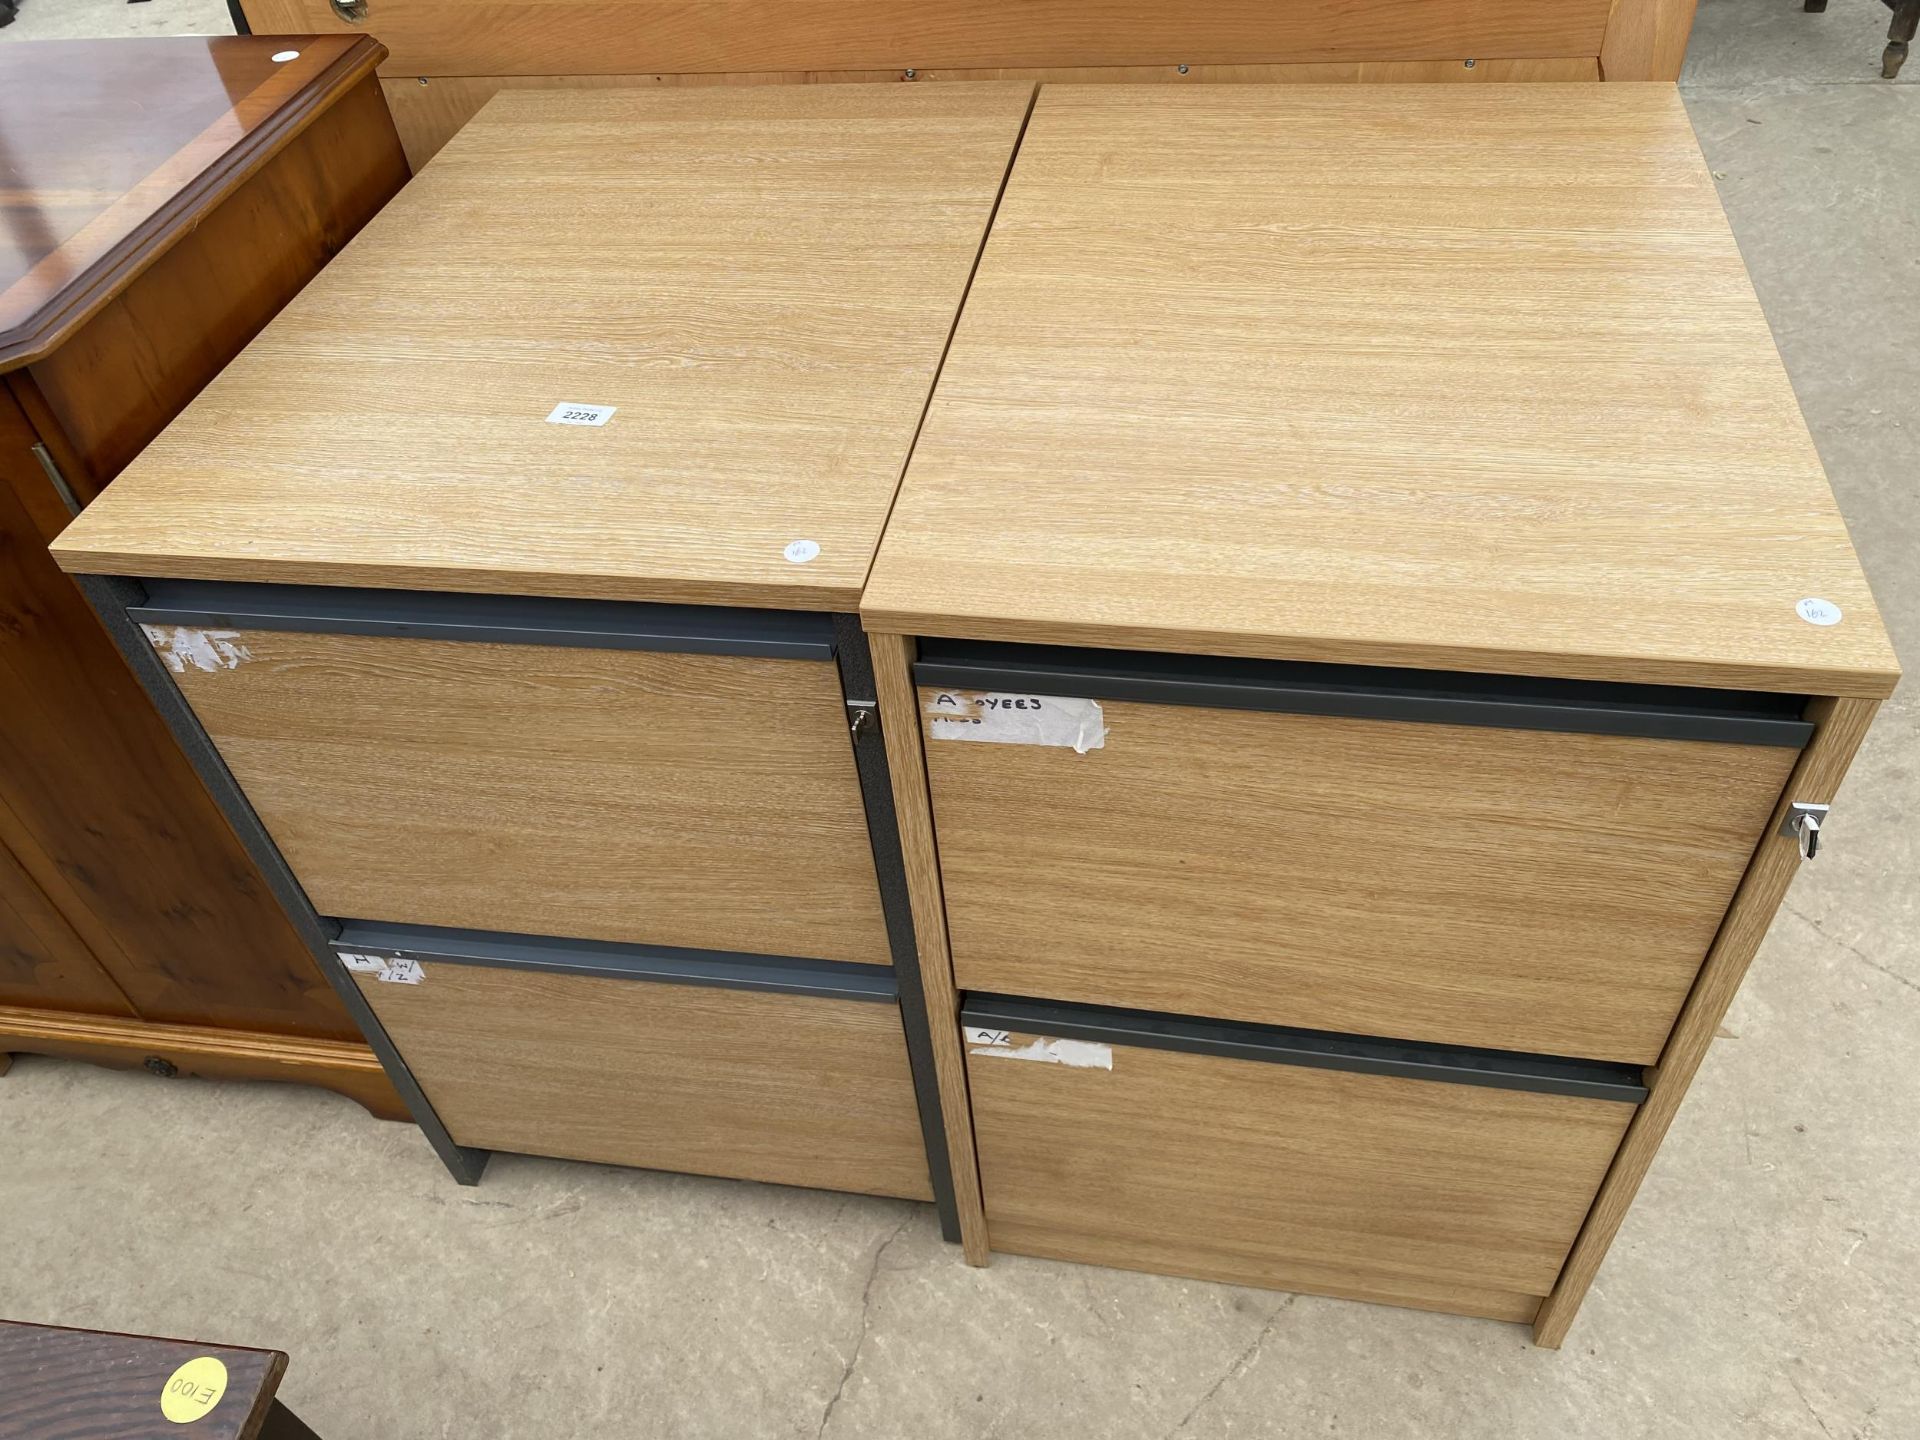 A PAIR OF LIMED OAK EFFECT TWO DRAWER FILING CABINETS COMPLETE WITH TWO KEYS